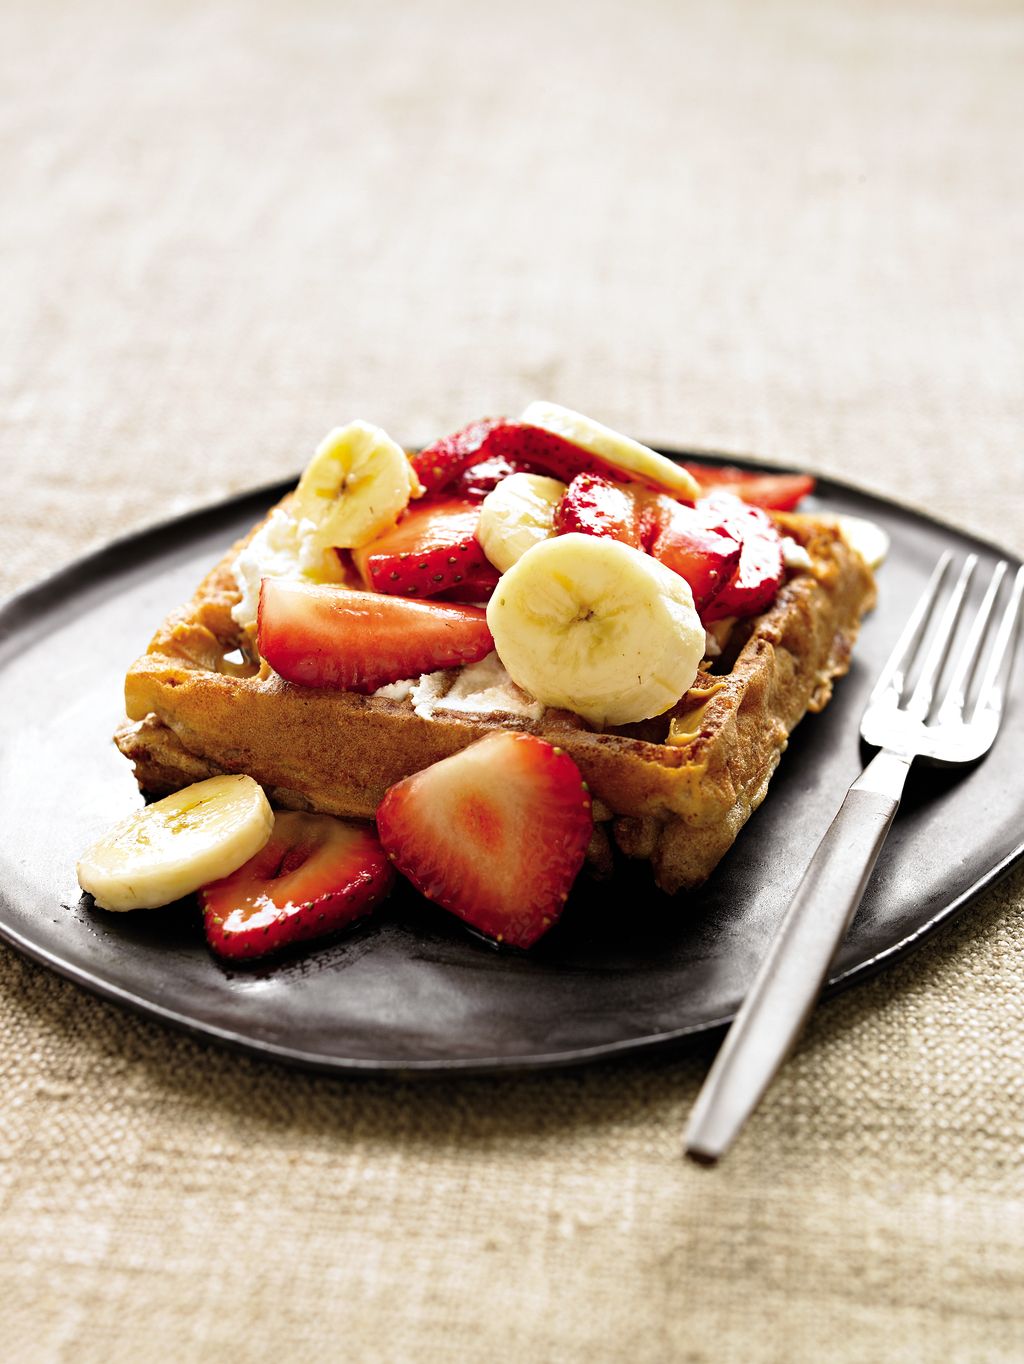 waffle sandwich with strawberries and bananas